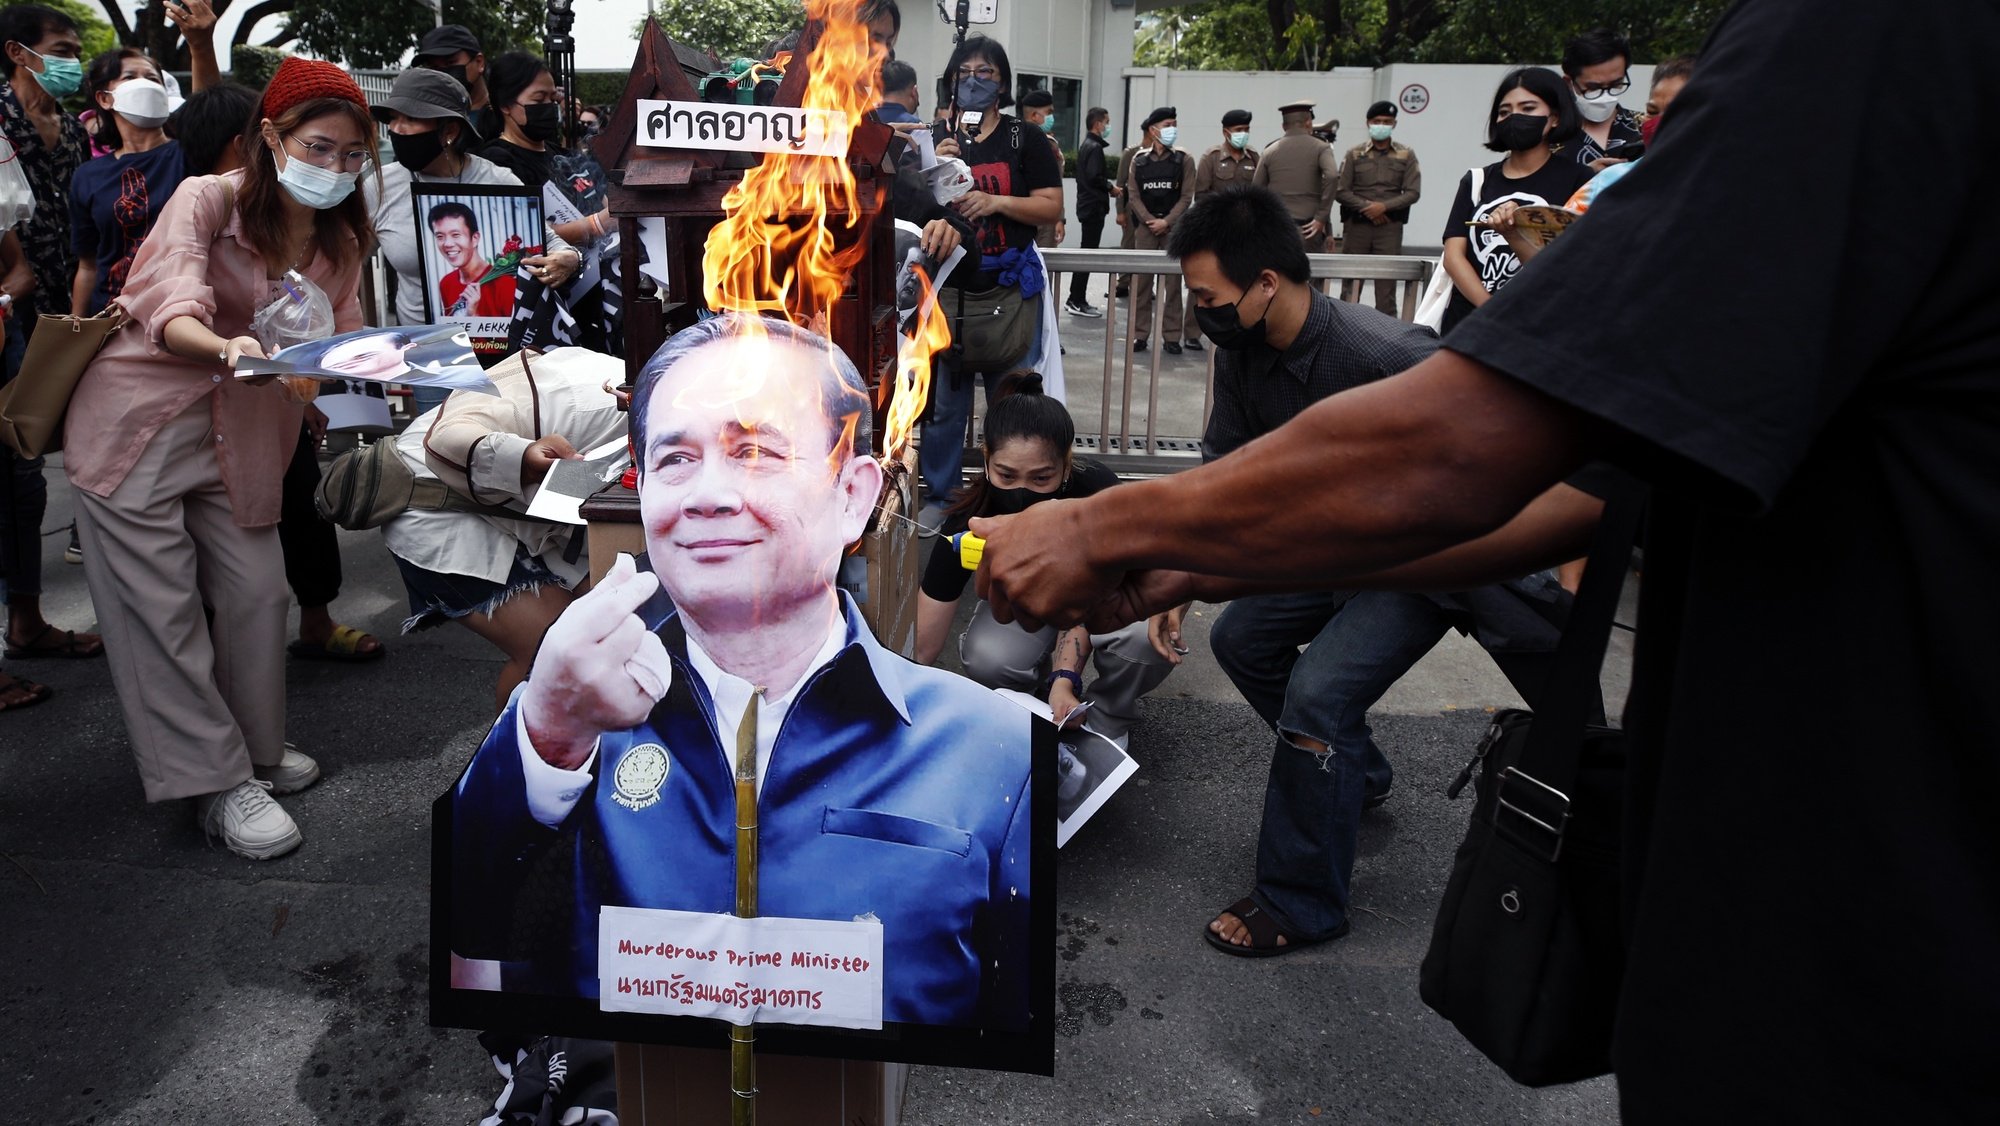 epa09937830 Anti-government protesters burn effigy of Thai Prime Minister Prayut Chan-o-cha during a protest against the attending of Thai prime minister for US-ASEAN summit and calling for the abolition of the section 112 criminal code lese majeste law and free political prisoners at the US embassy in Bangkok, Thailand, 10 May 2022. Anti-government protests core leaders and many protesters have been arrested and detained after being charged with insulting the monarchy, under the so-called Lese Majeste law and sedition over their years-long street protest calling to reform the monarchy.  EPA/RUNGROJ YONGRIT